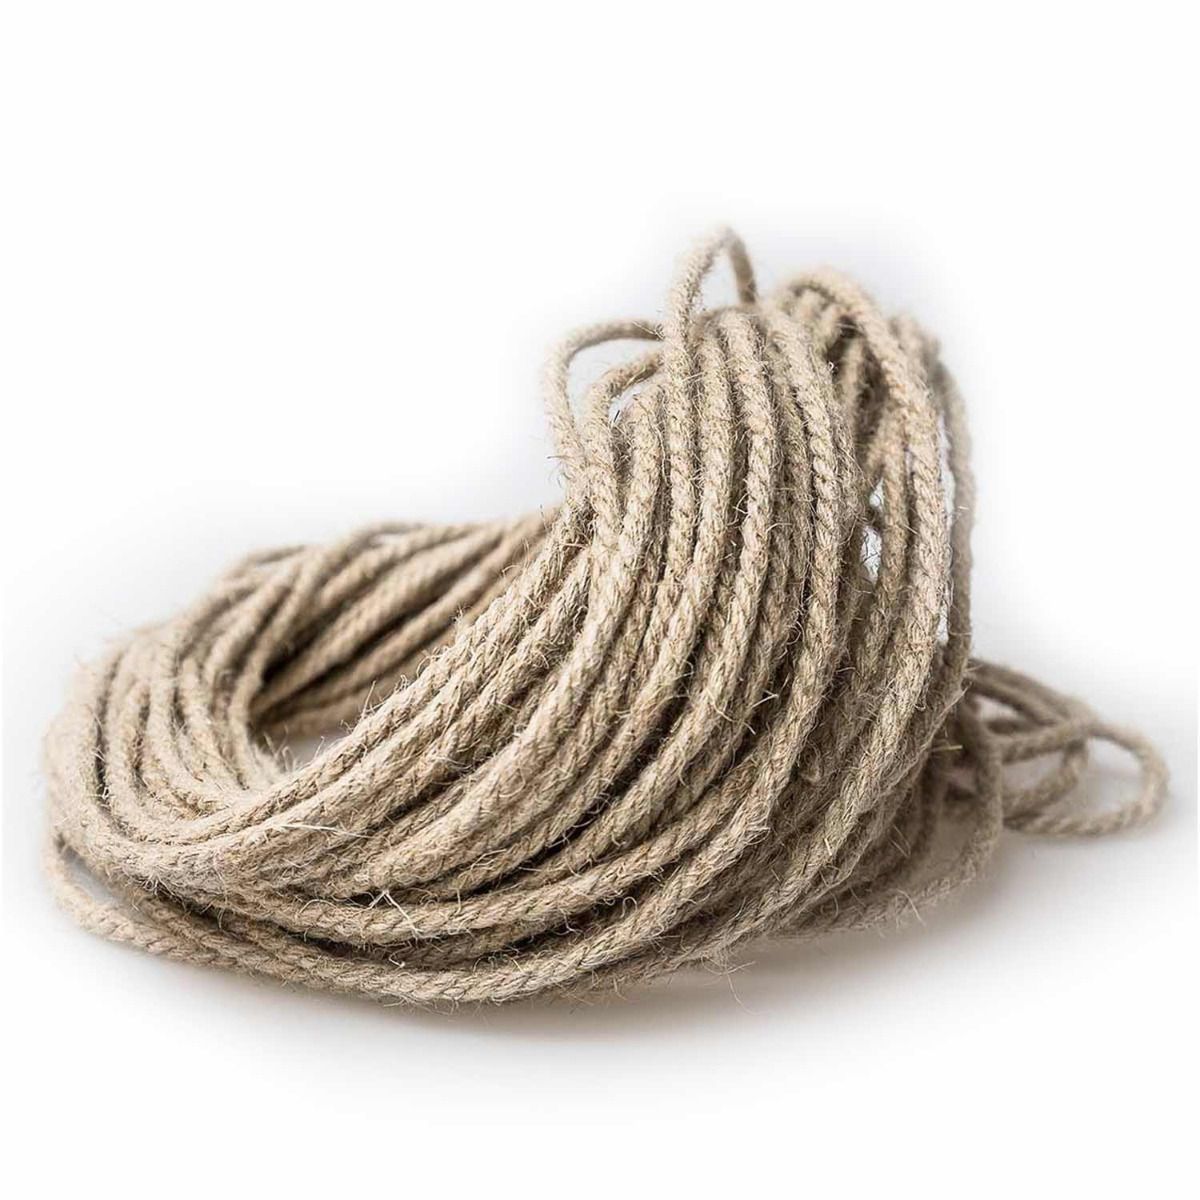 10mm Thick Rope Strong Natural Rope, Jute Rope For Craft Rope/cat  Scratching Rope/garden Bundling - Cords - AliExpress